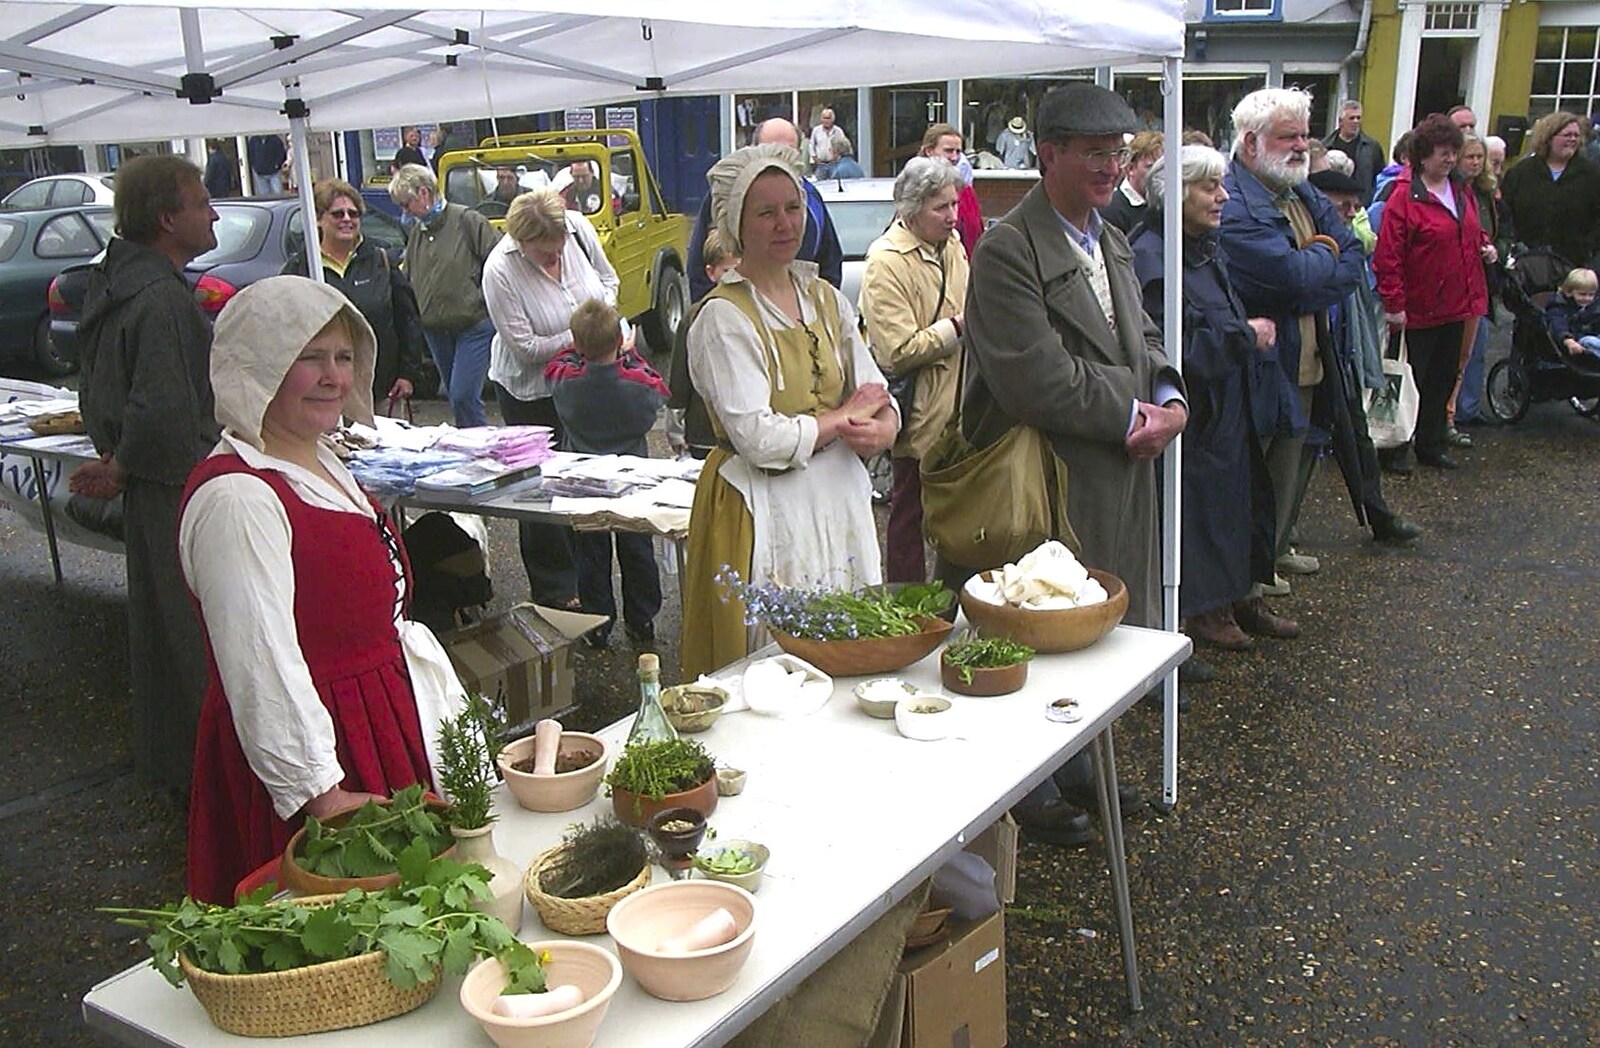 There's a Mediaeval herb market going on from Badminton Sprogs and The Skelton Festival, Diss, Norfolk - 1st May 2004